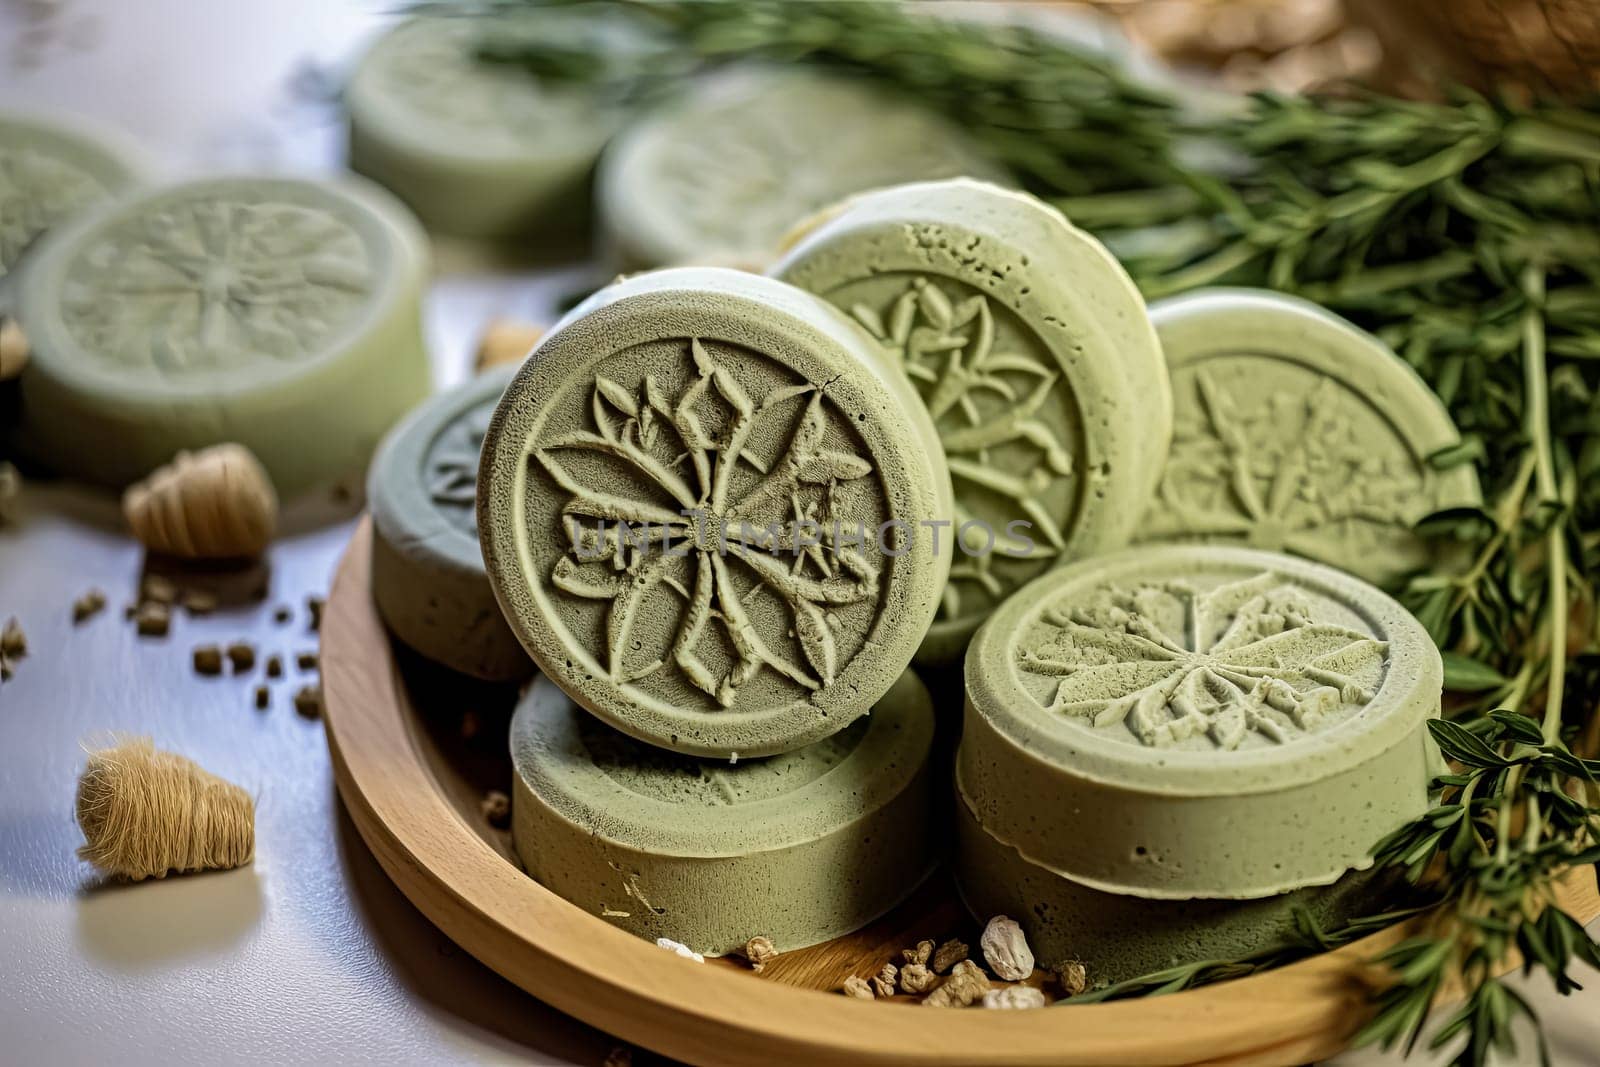 A stack of green bath bombs with a cross on them. The bath bombs are piled on top of each other on a wooden table